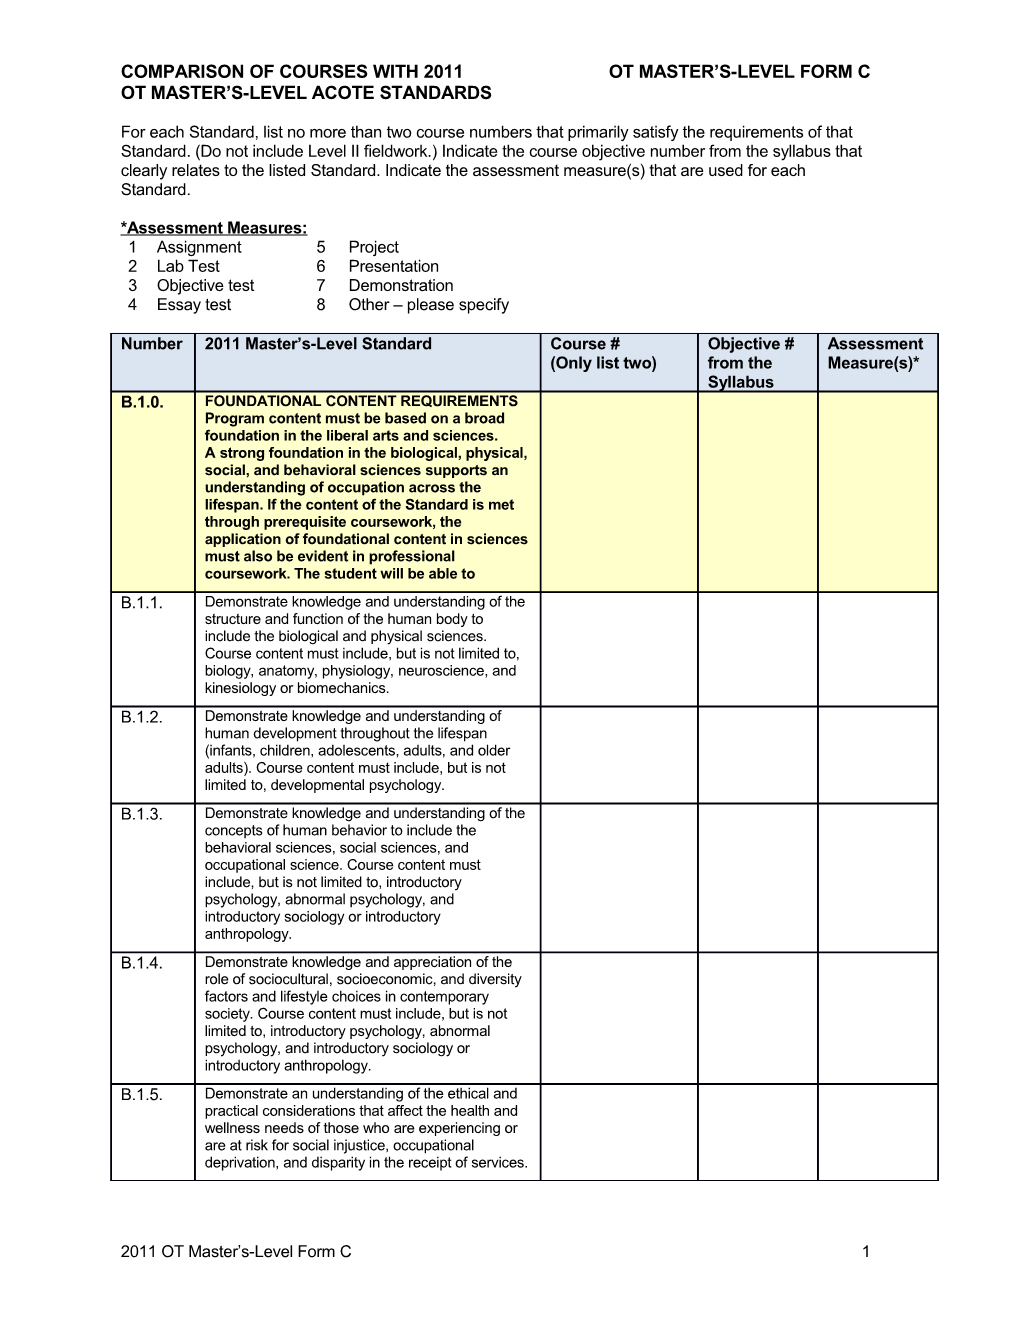 Template for Reviewing Content Standards